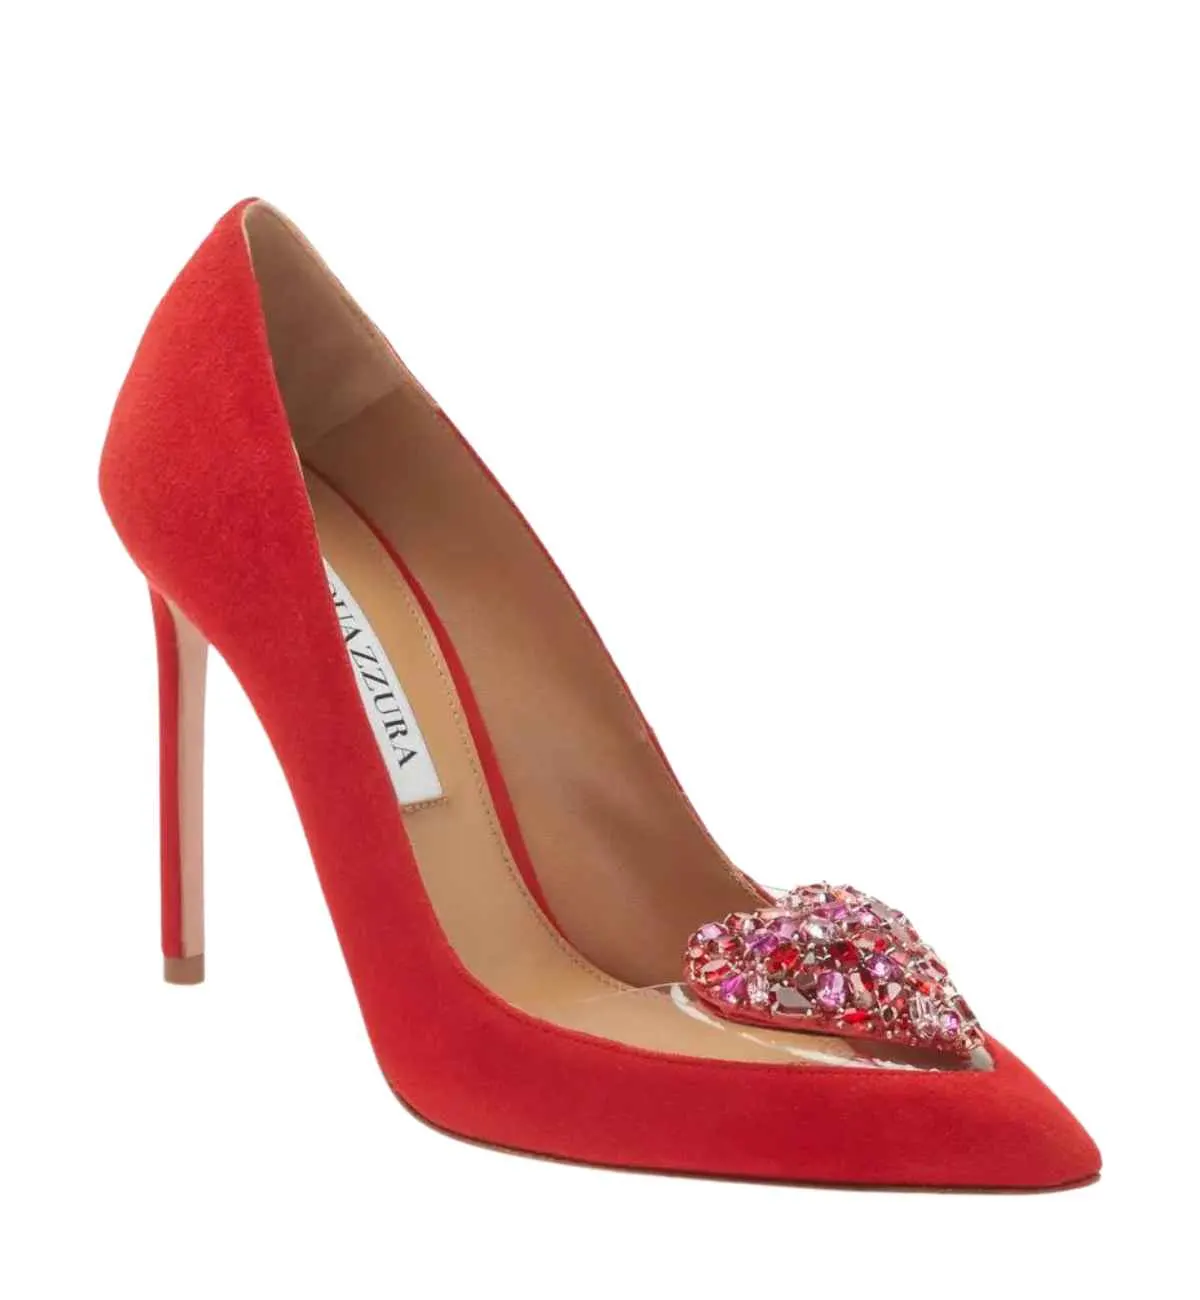 Red heart heel with heart shaped gem at the front on white background.